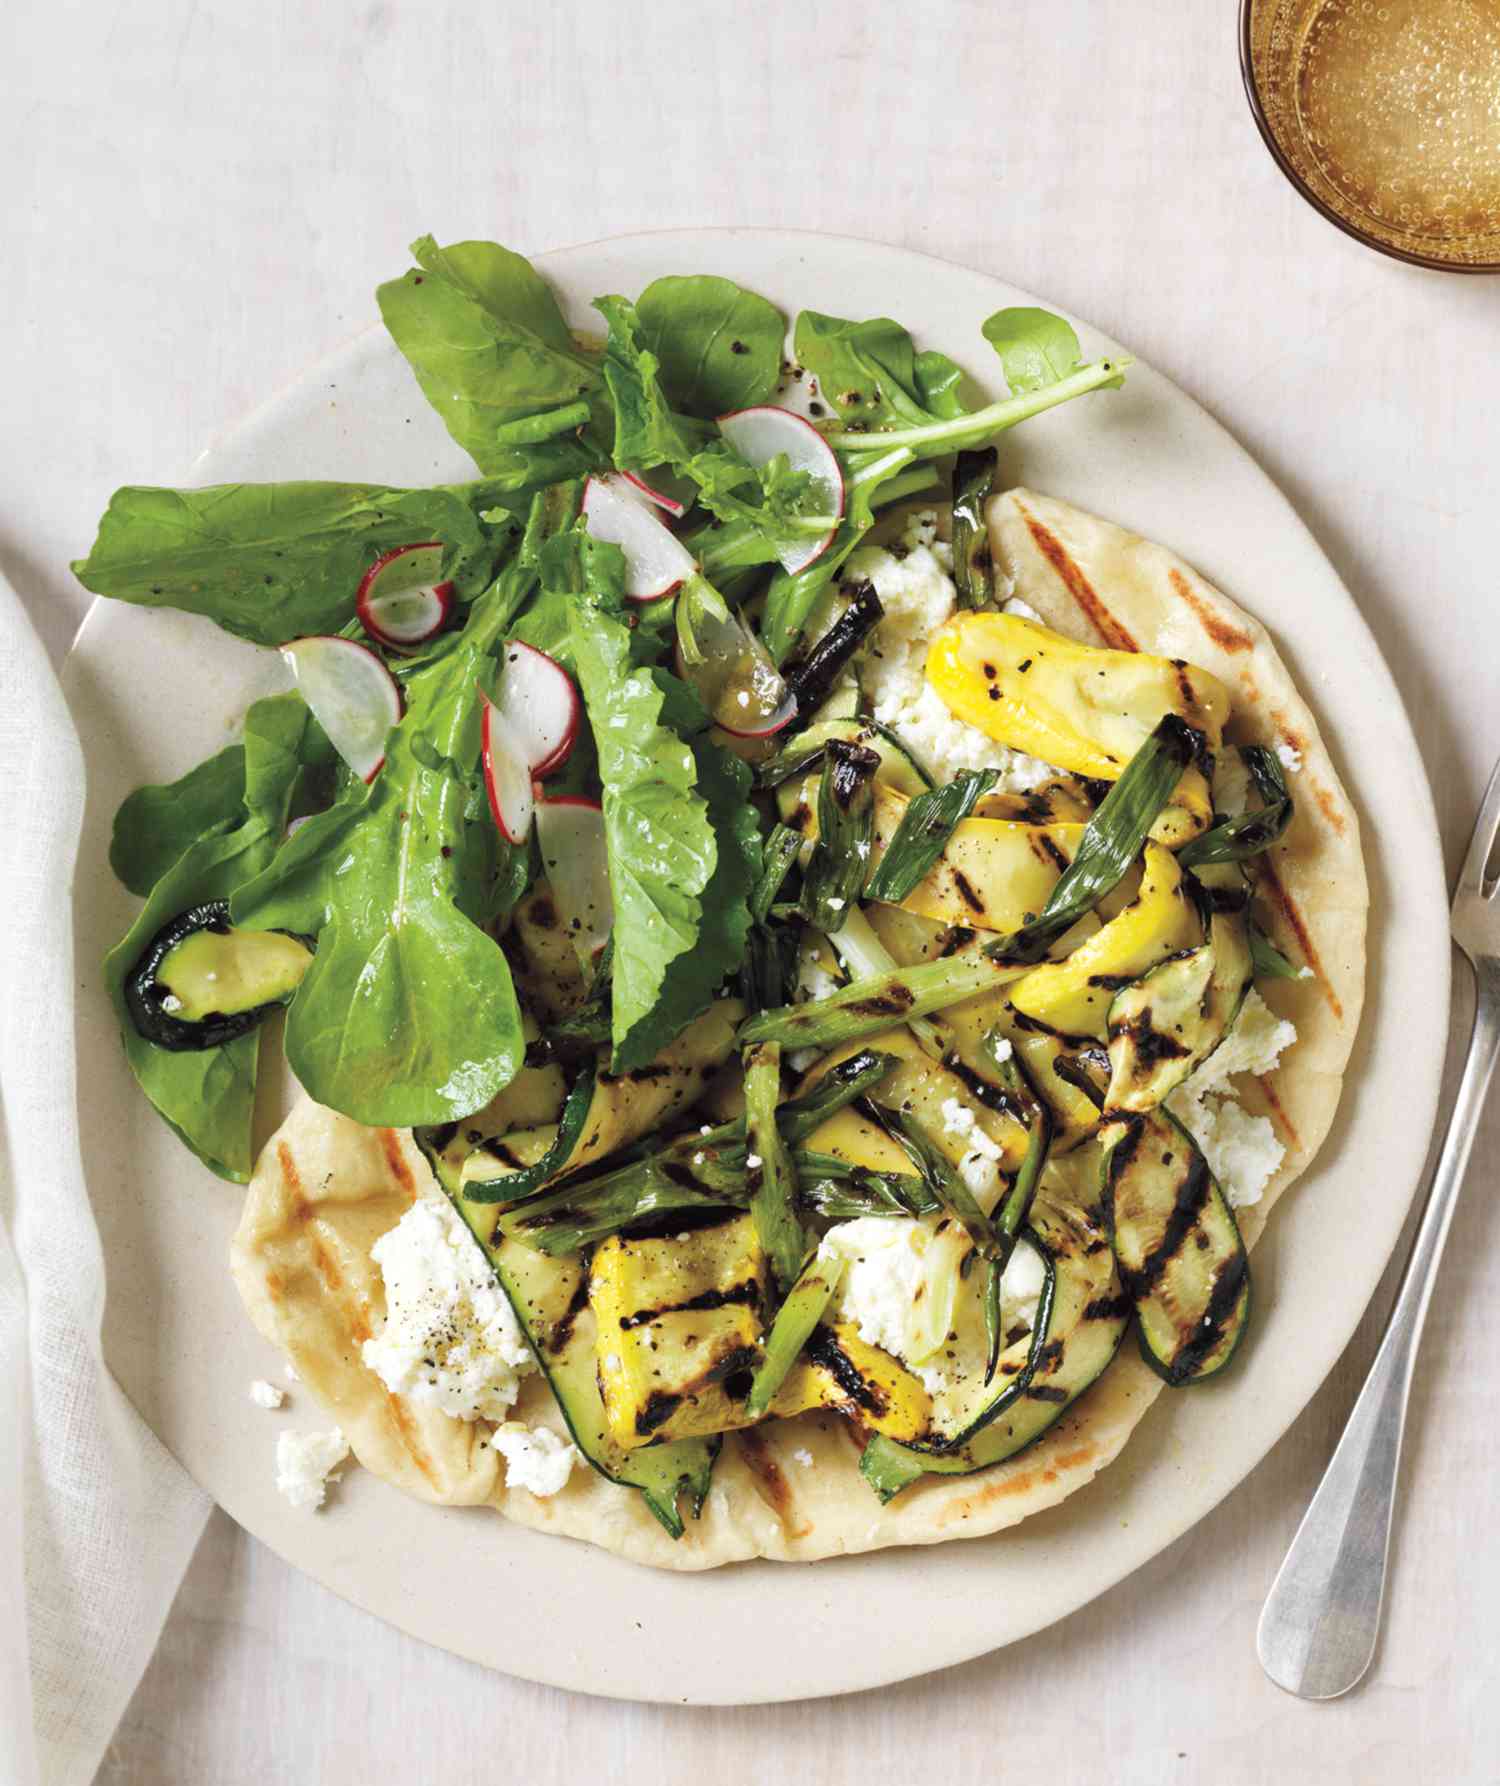 Grilled Pizzas With Ricotta, Summer Squash, and Scallions